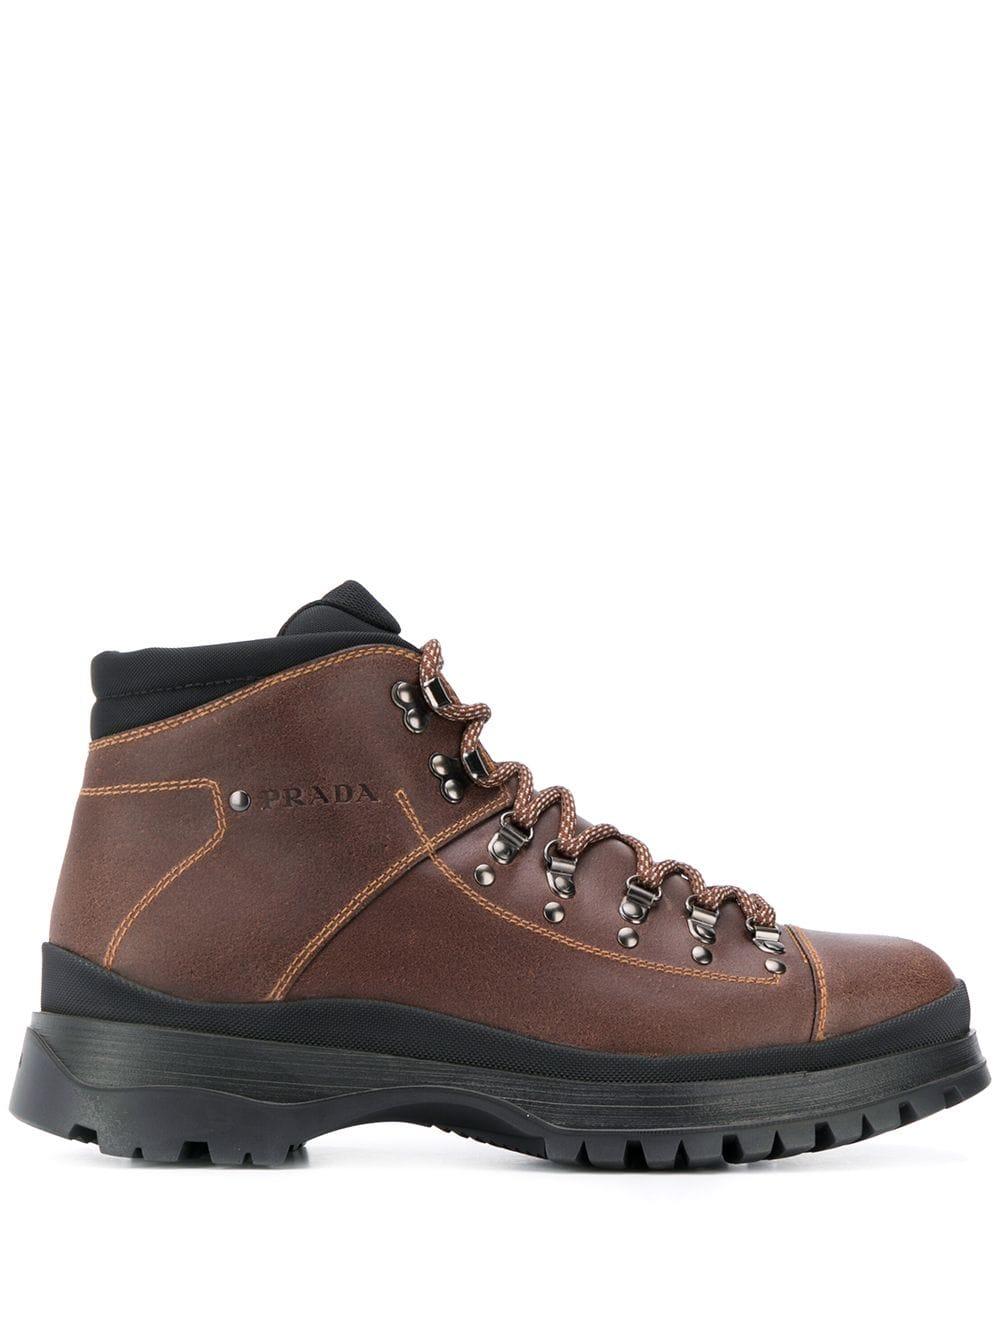 Prada Leather Suede Hiking Boot in Brown for Men | Lyst